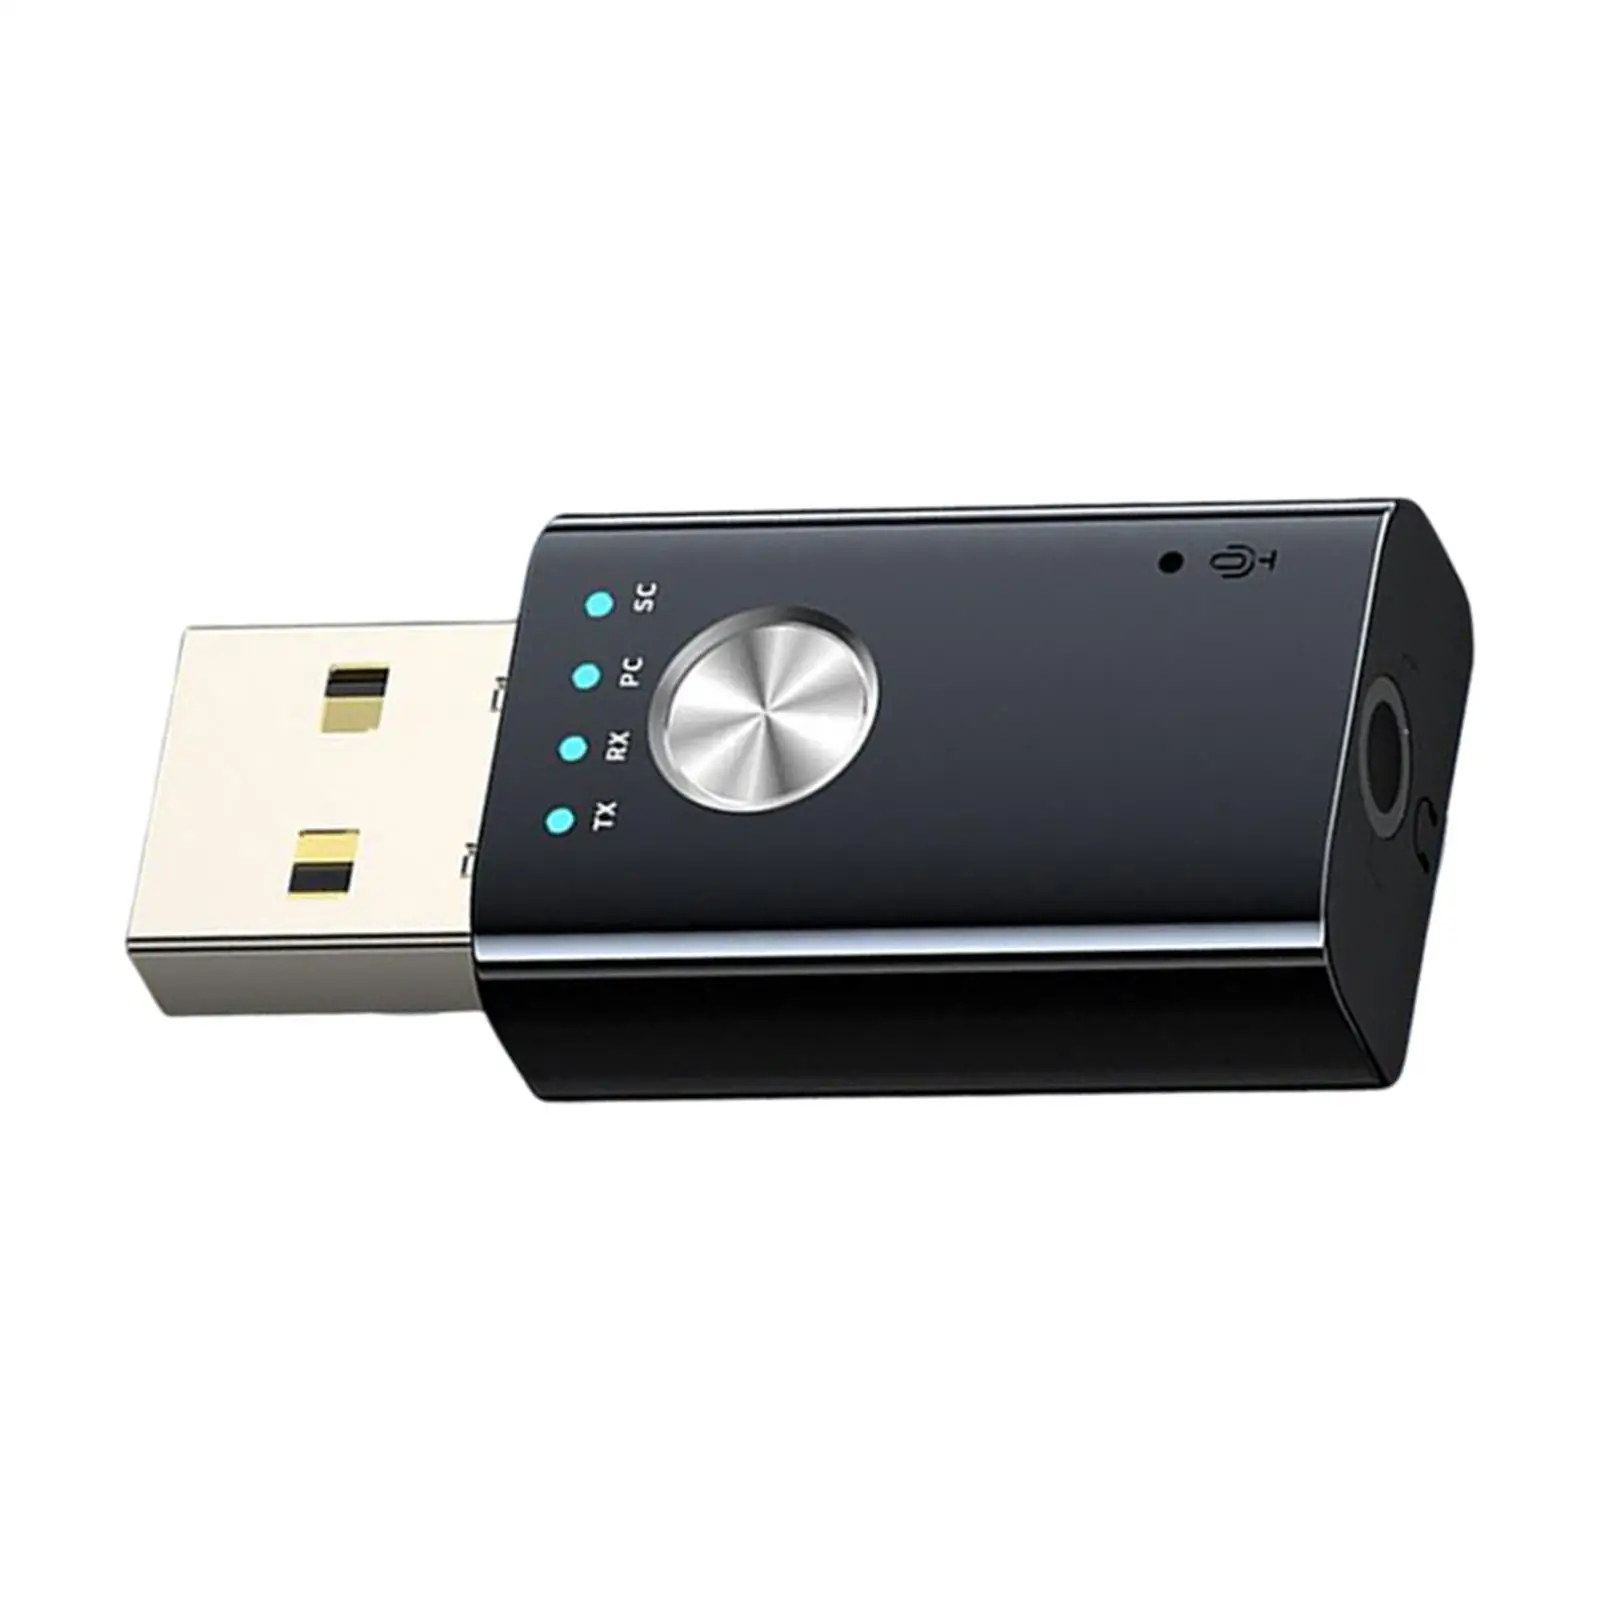 Mini 4 in 1 USB Bluetooth 5.0 Transmitter Receiver Sound Card Mode 3.5mm AUX HiFi Audio Wireless Audio Adapter Power by USB